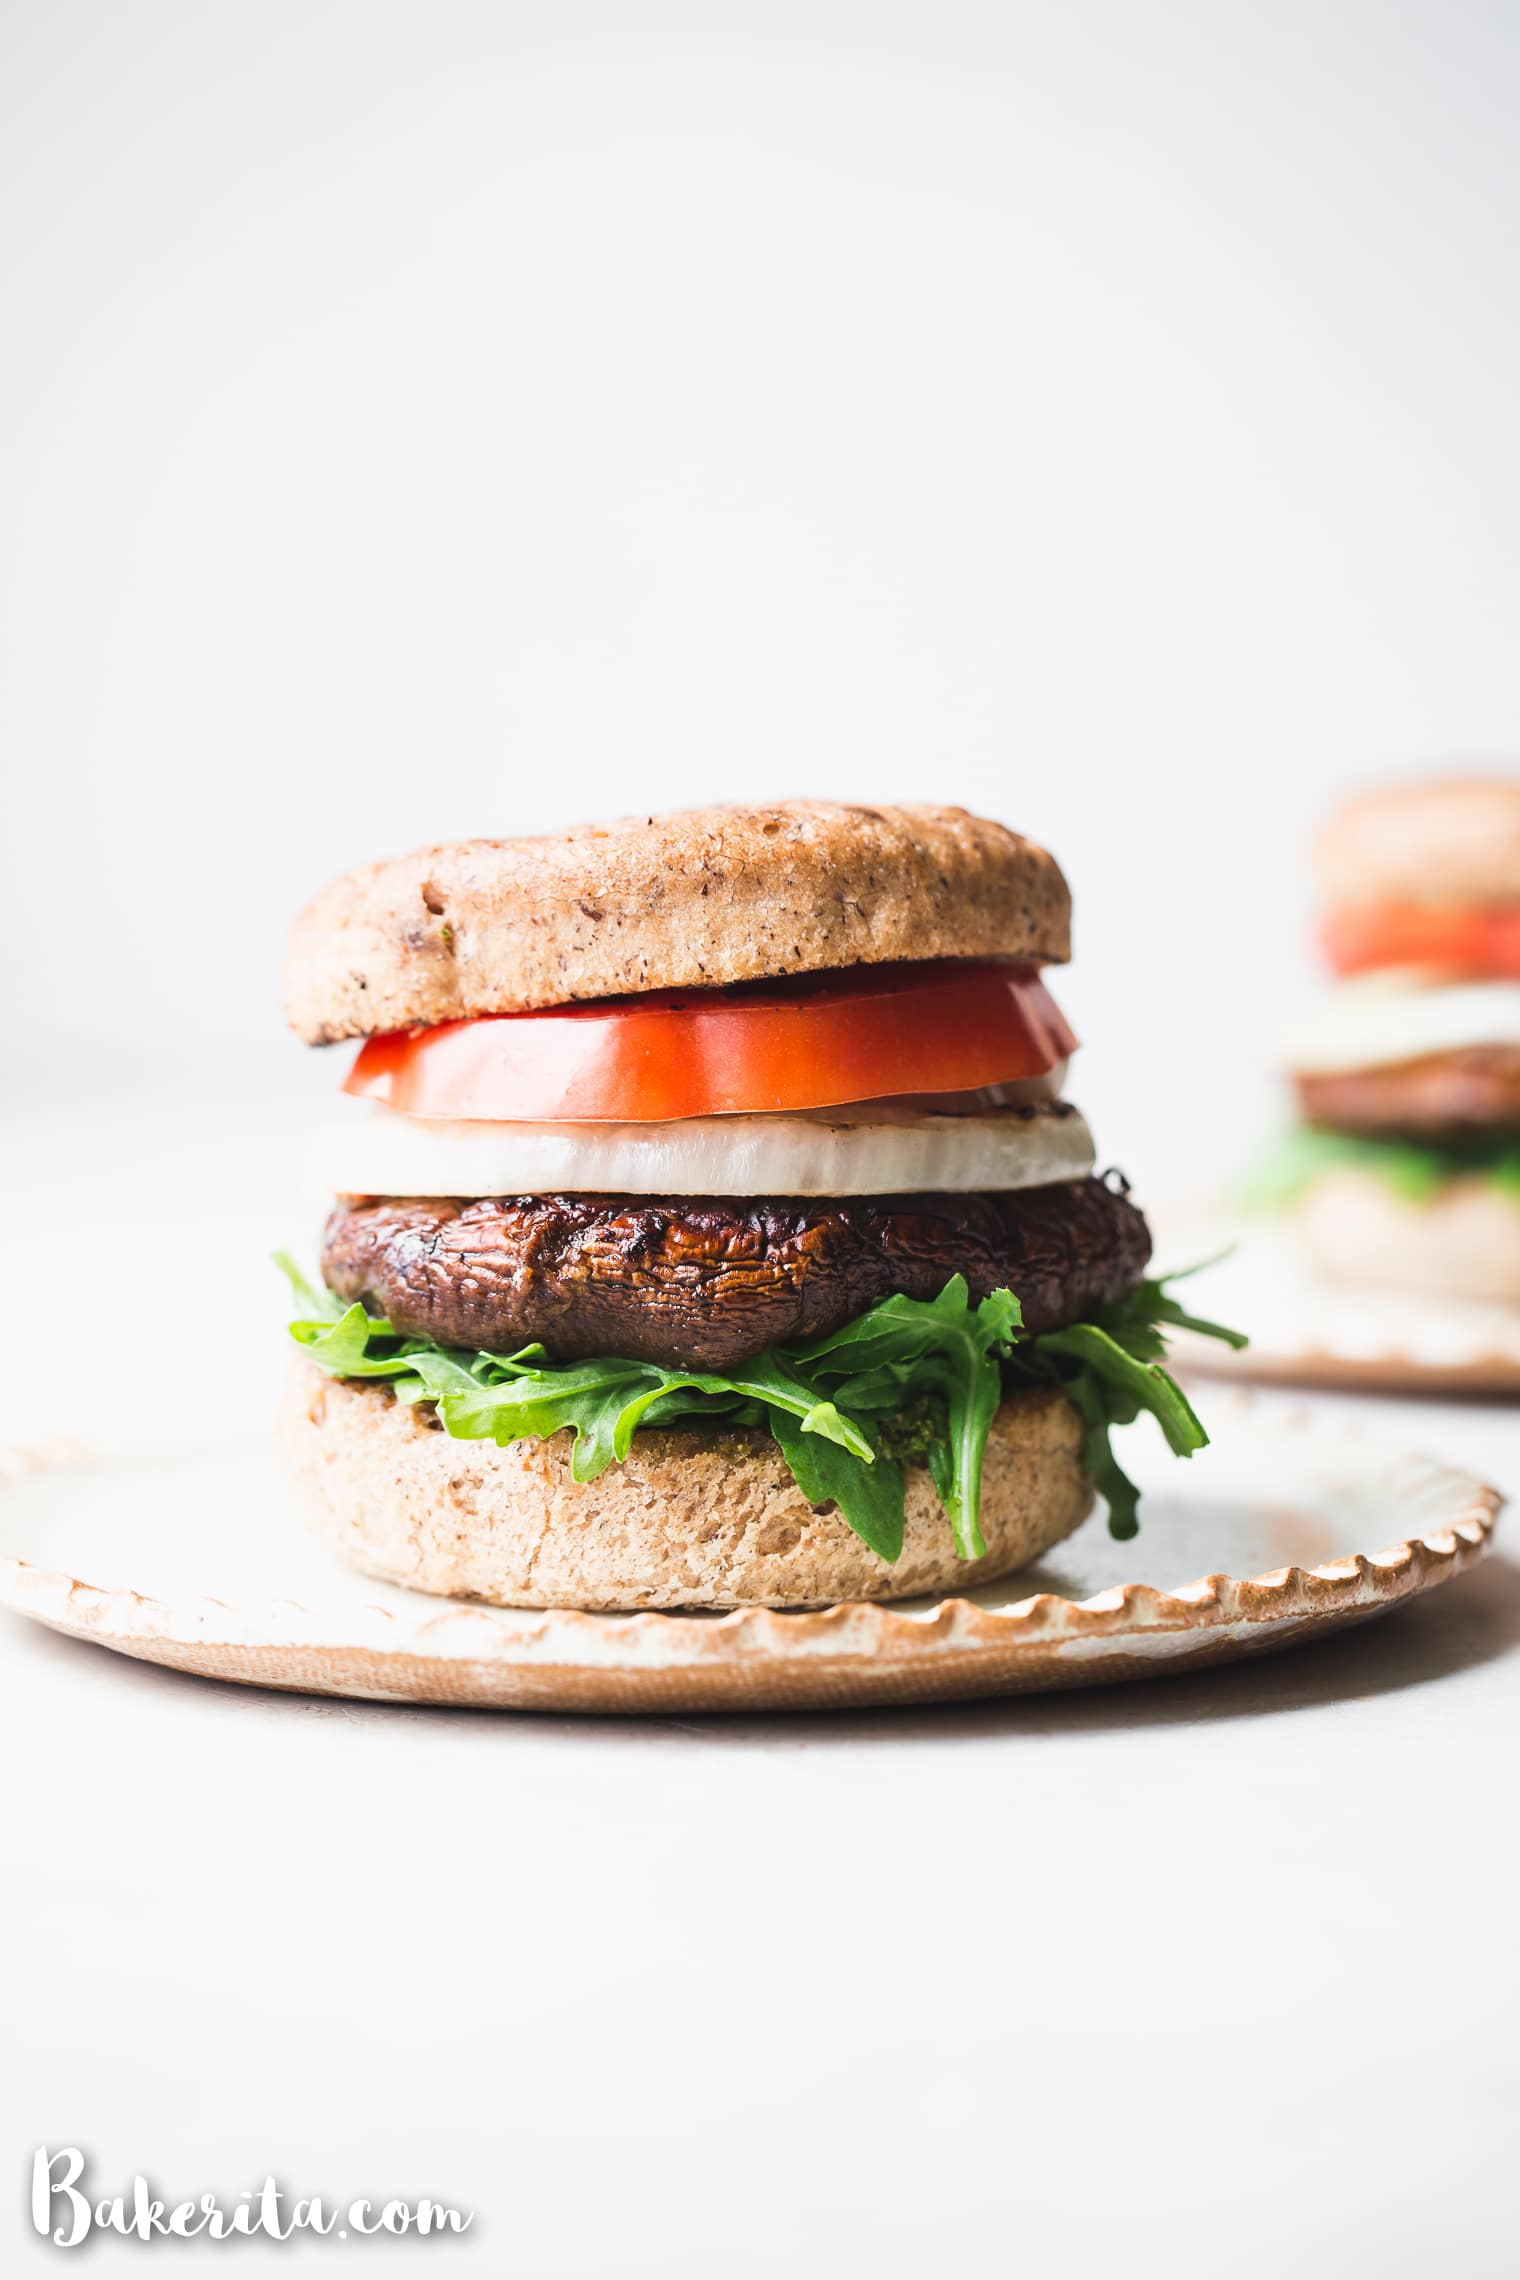 These Vegan Grilled Portobello Burgers are packed with savory, umami flavor thanks to the scrumptious marinade. When piled high with additions like grilled onions and vegan pesto, it's a burger you'll want to make every weekend. The grilled portobello mushrooms are also perfect as a side dish.